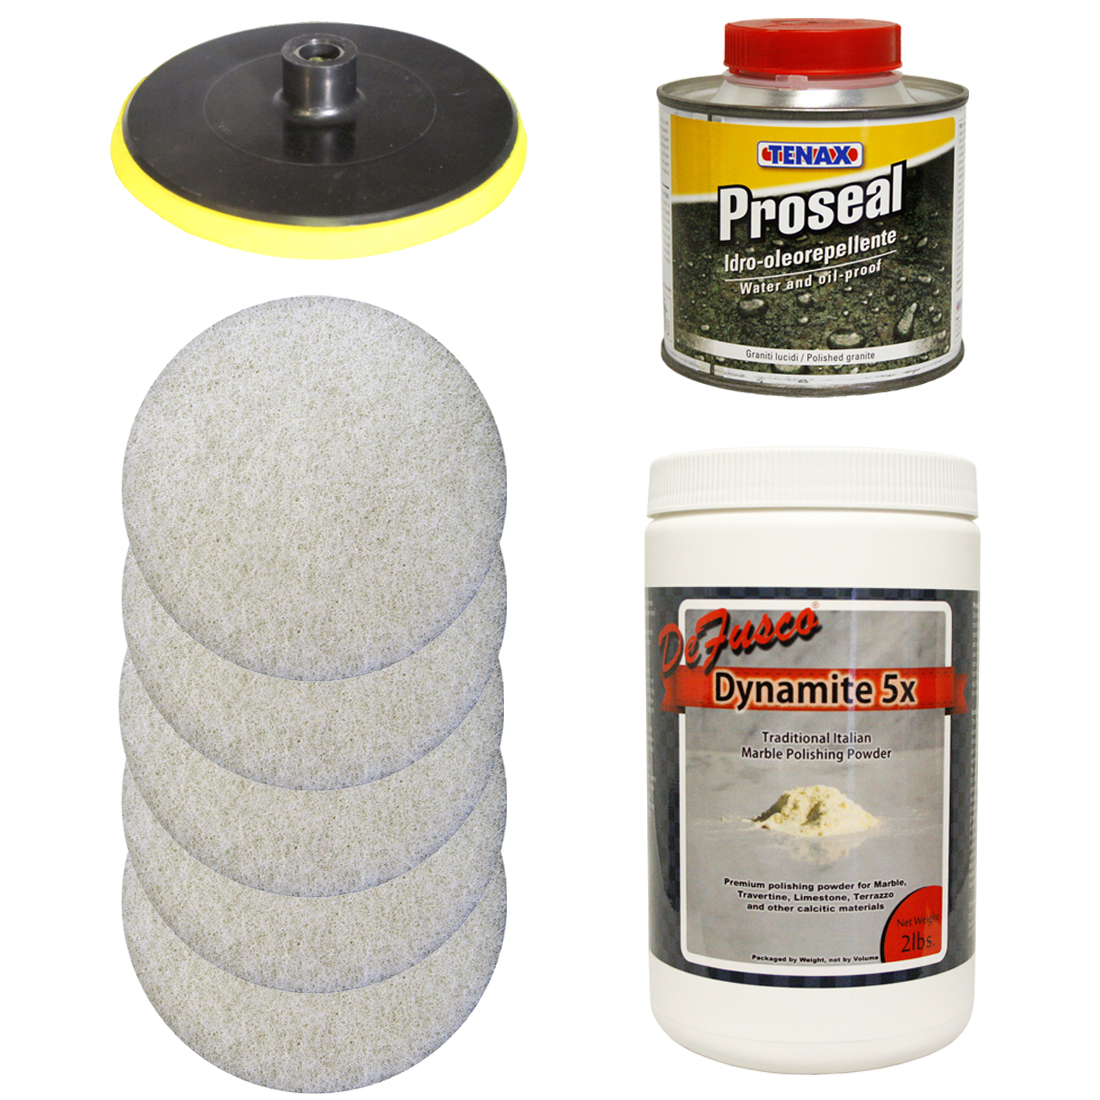  Tin Oxide Polishing Compound - Granite and Marble